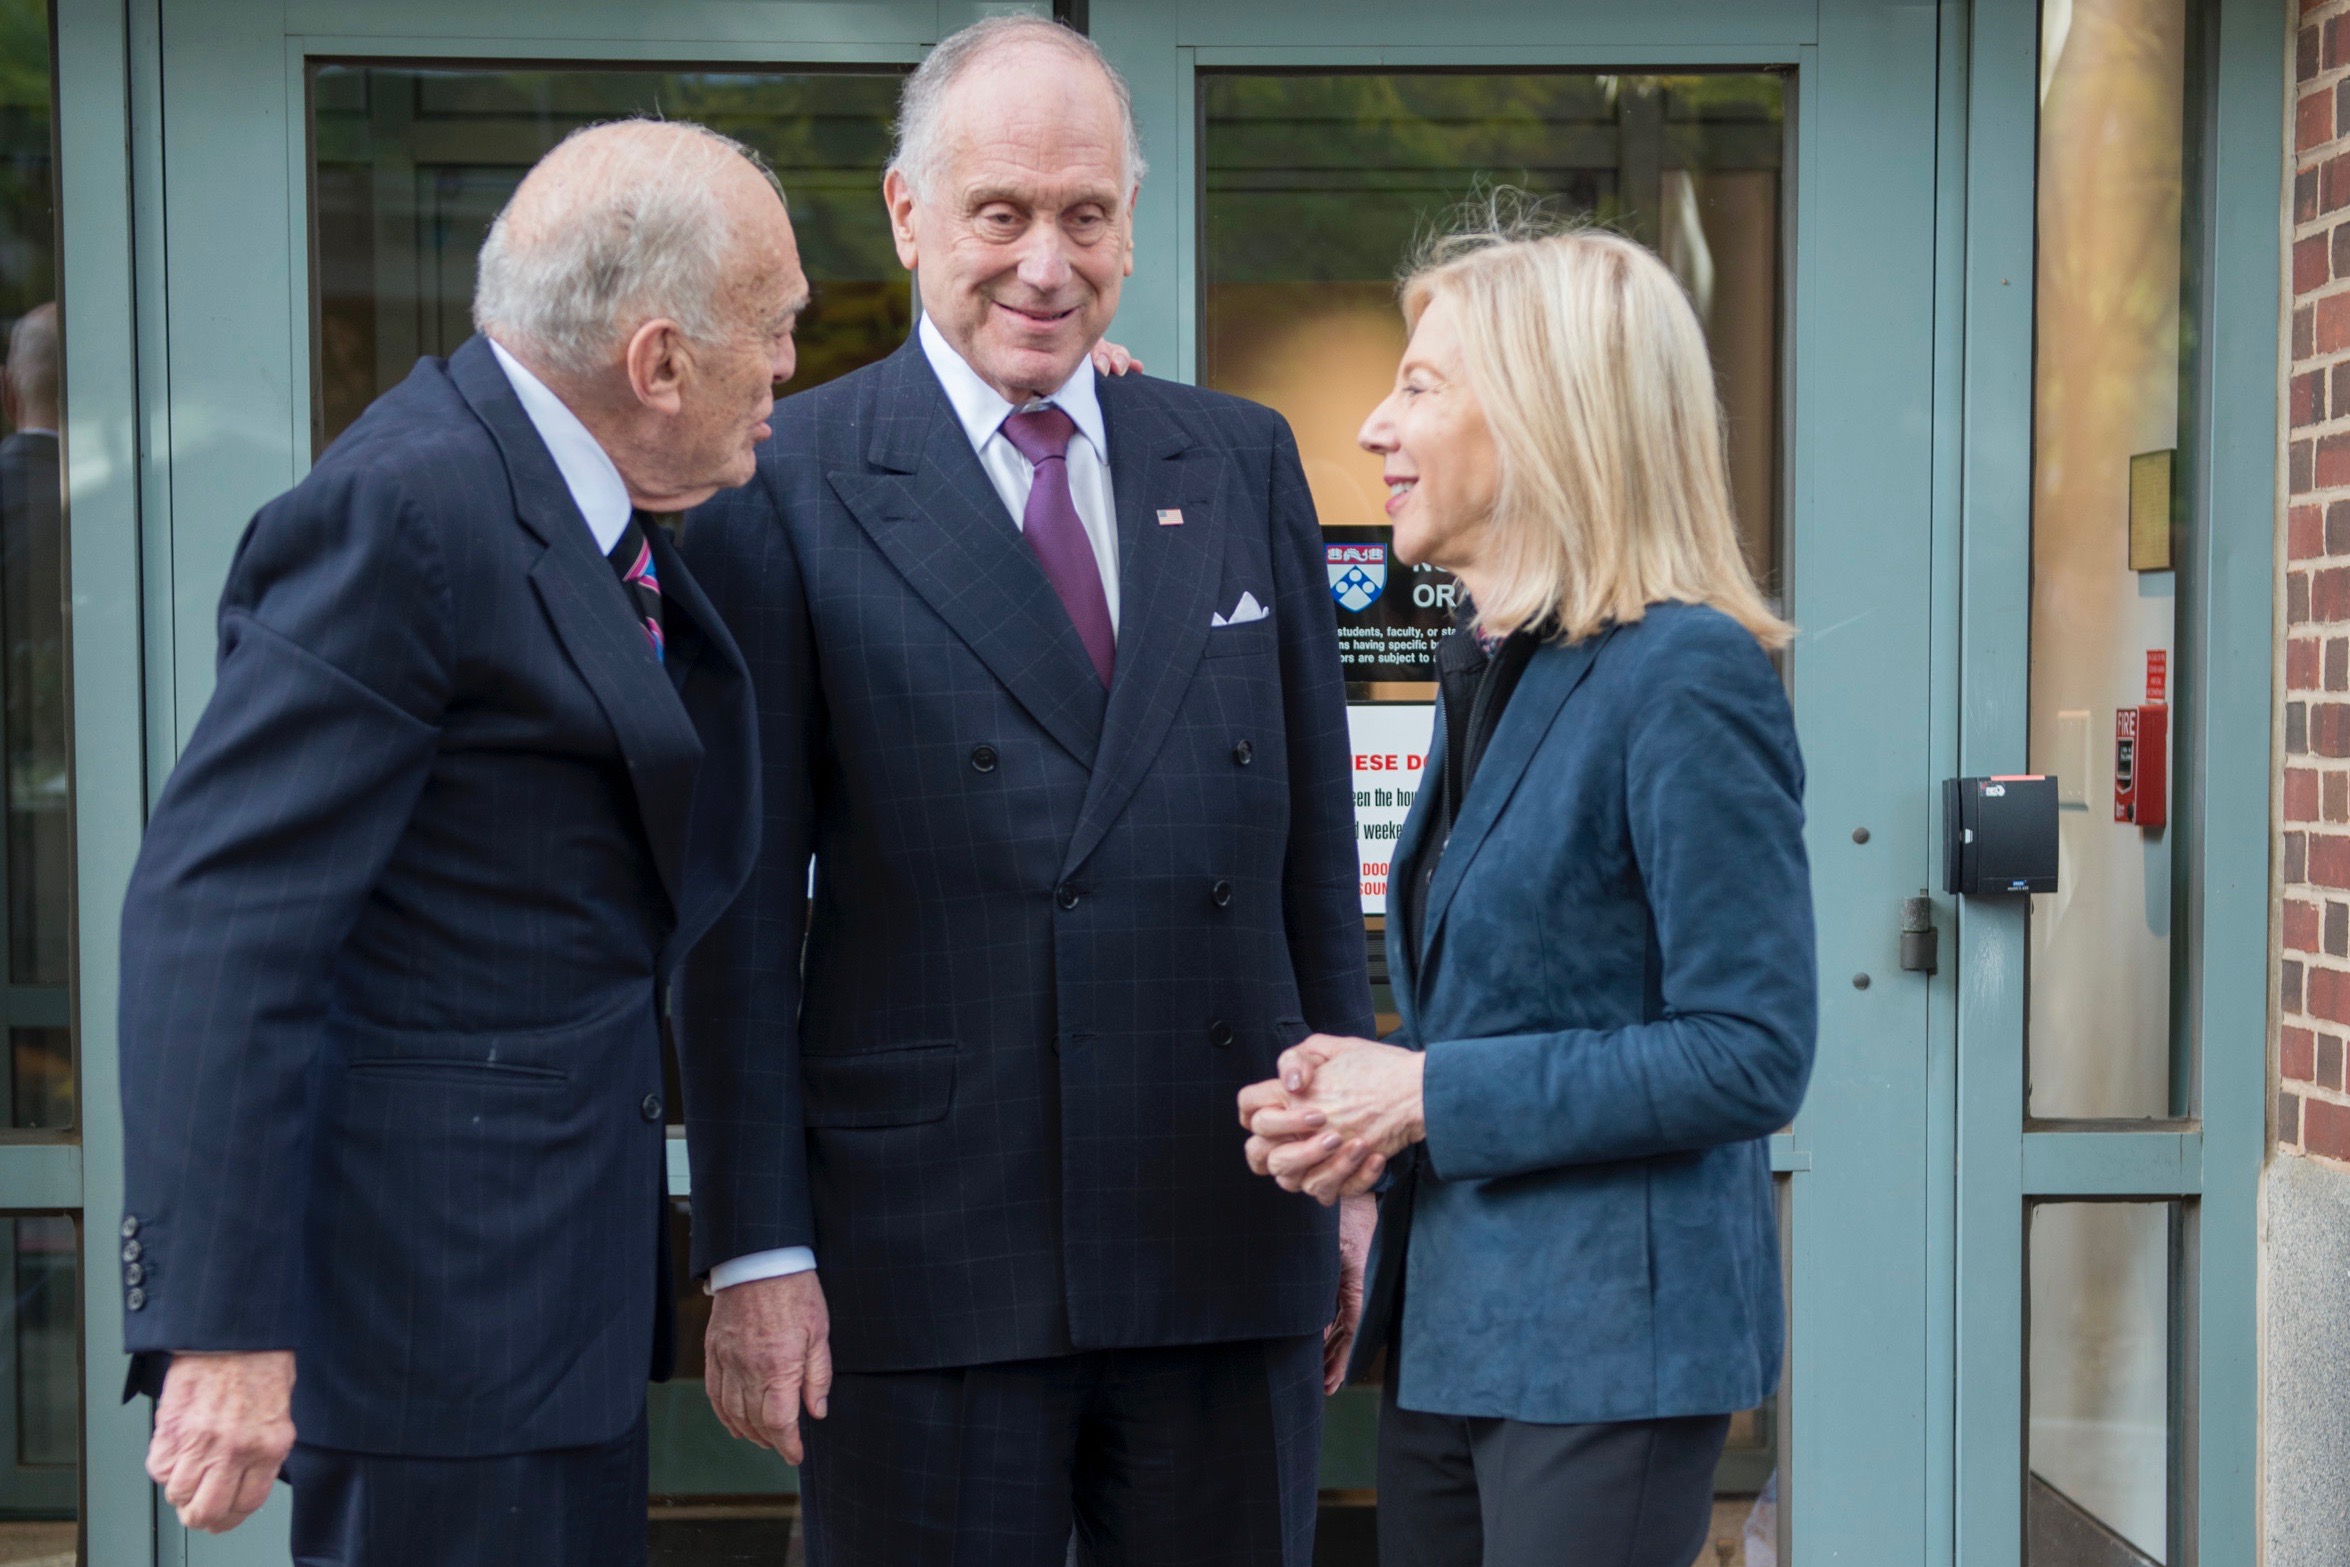 Penn-alumni-and-brothers-Leonard-and-Ronald-Lauder-chat-with-Penn-President-Amy-Gutmann